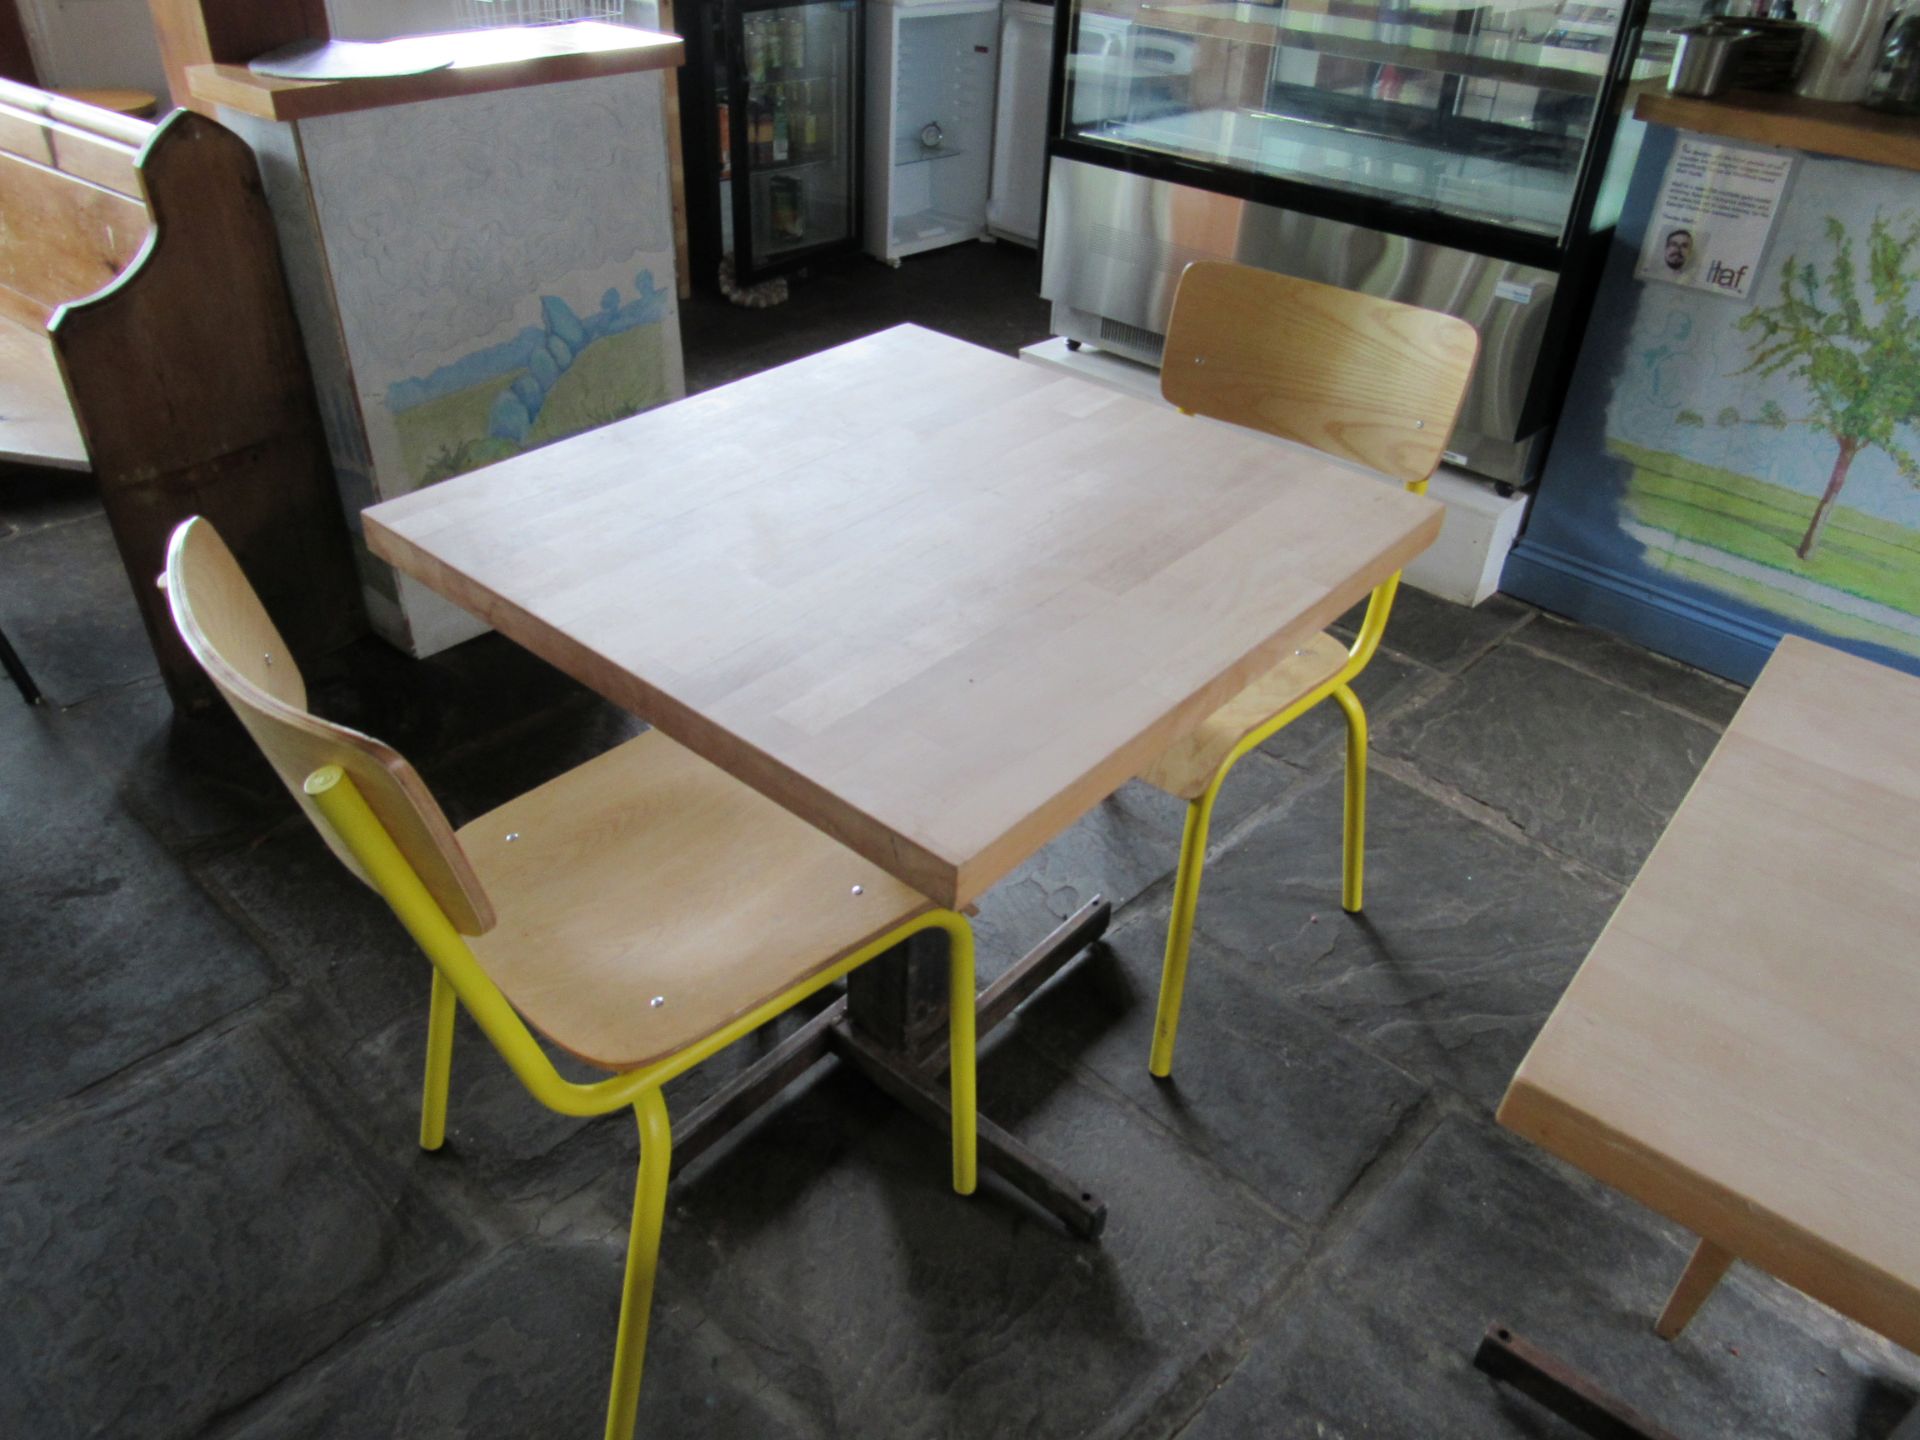 Small square table with 2 café chairs